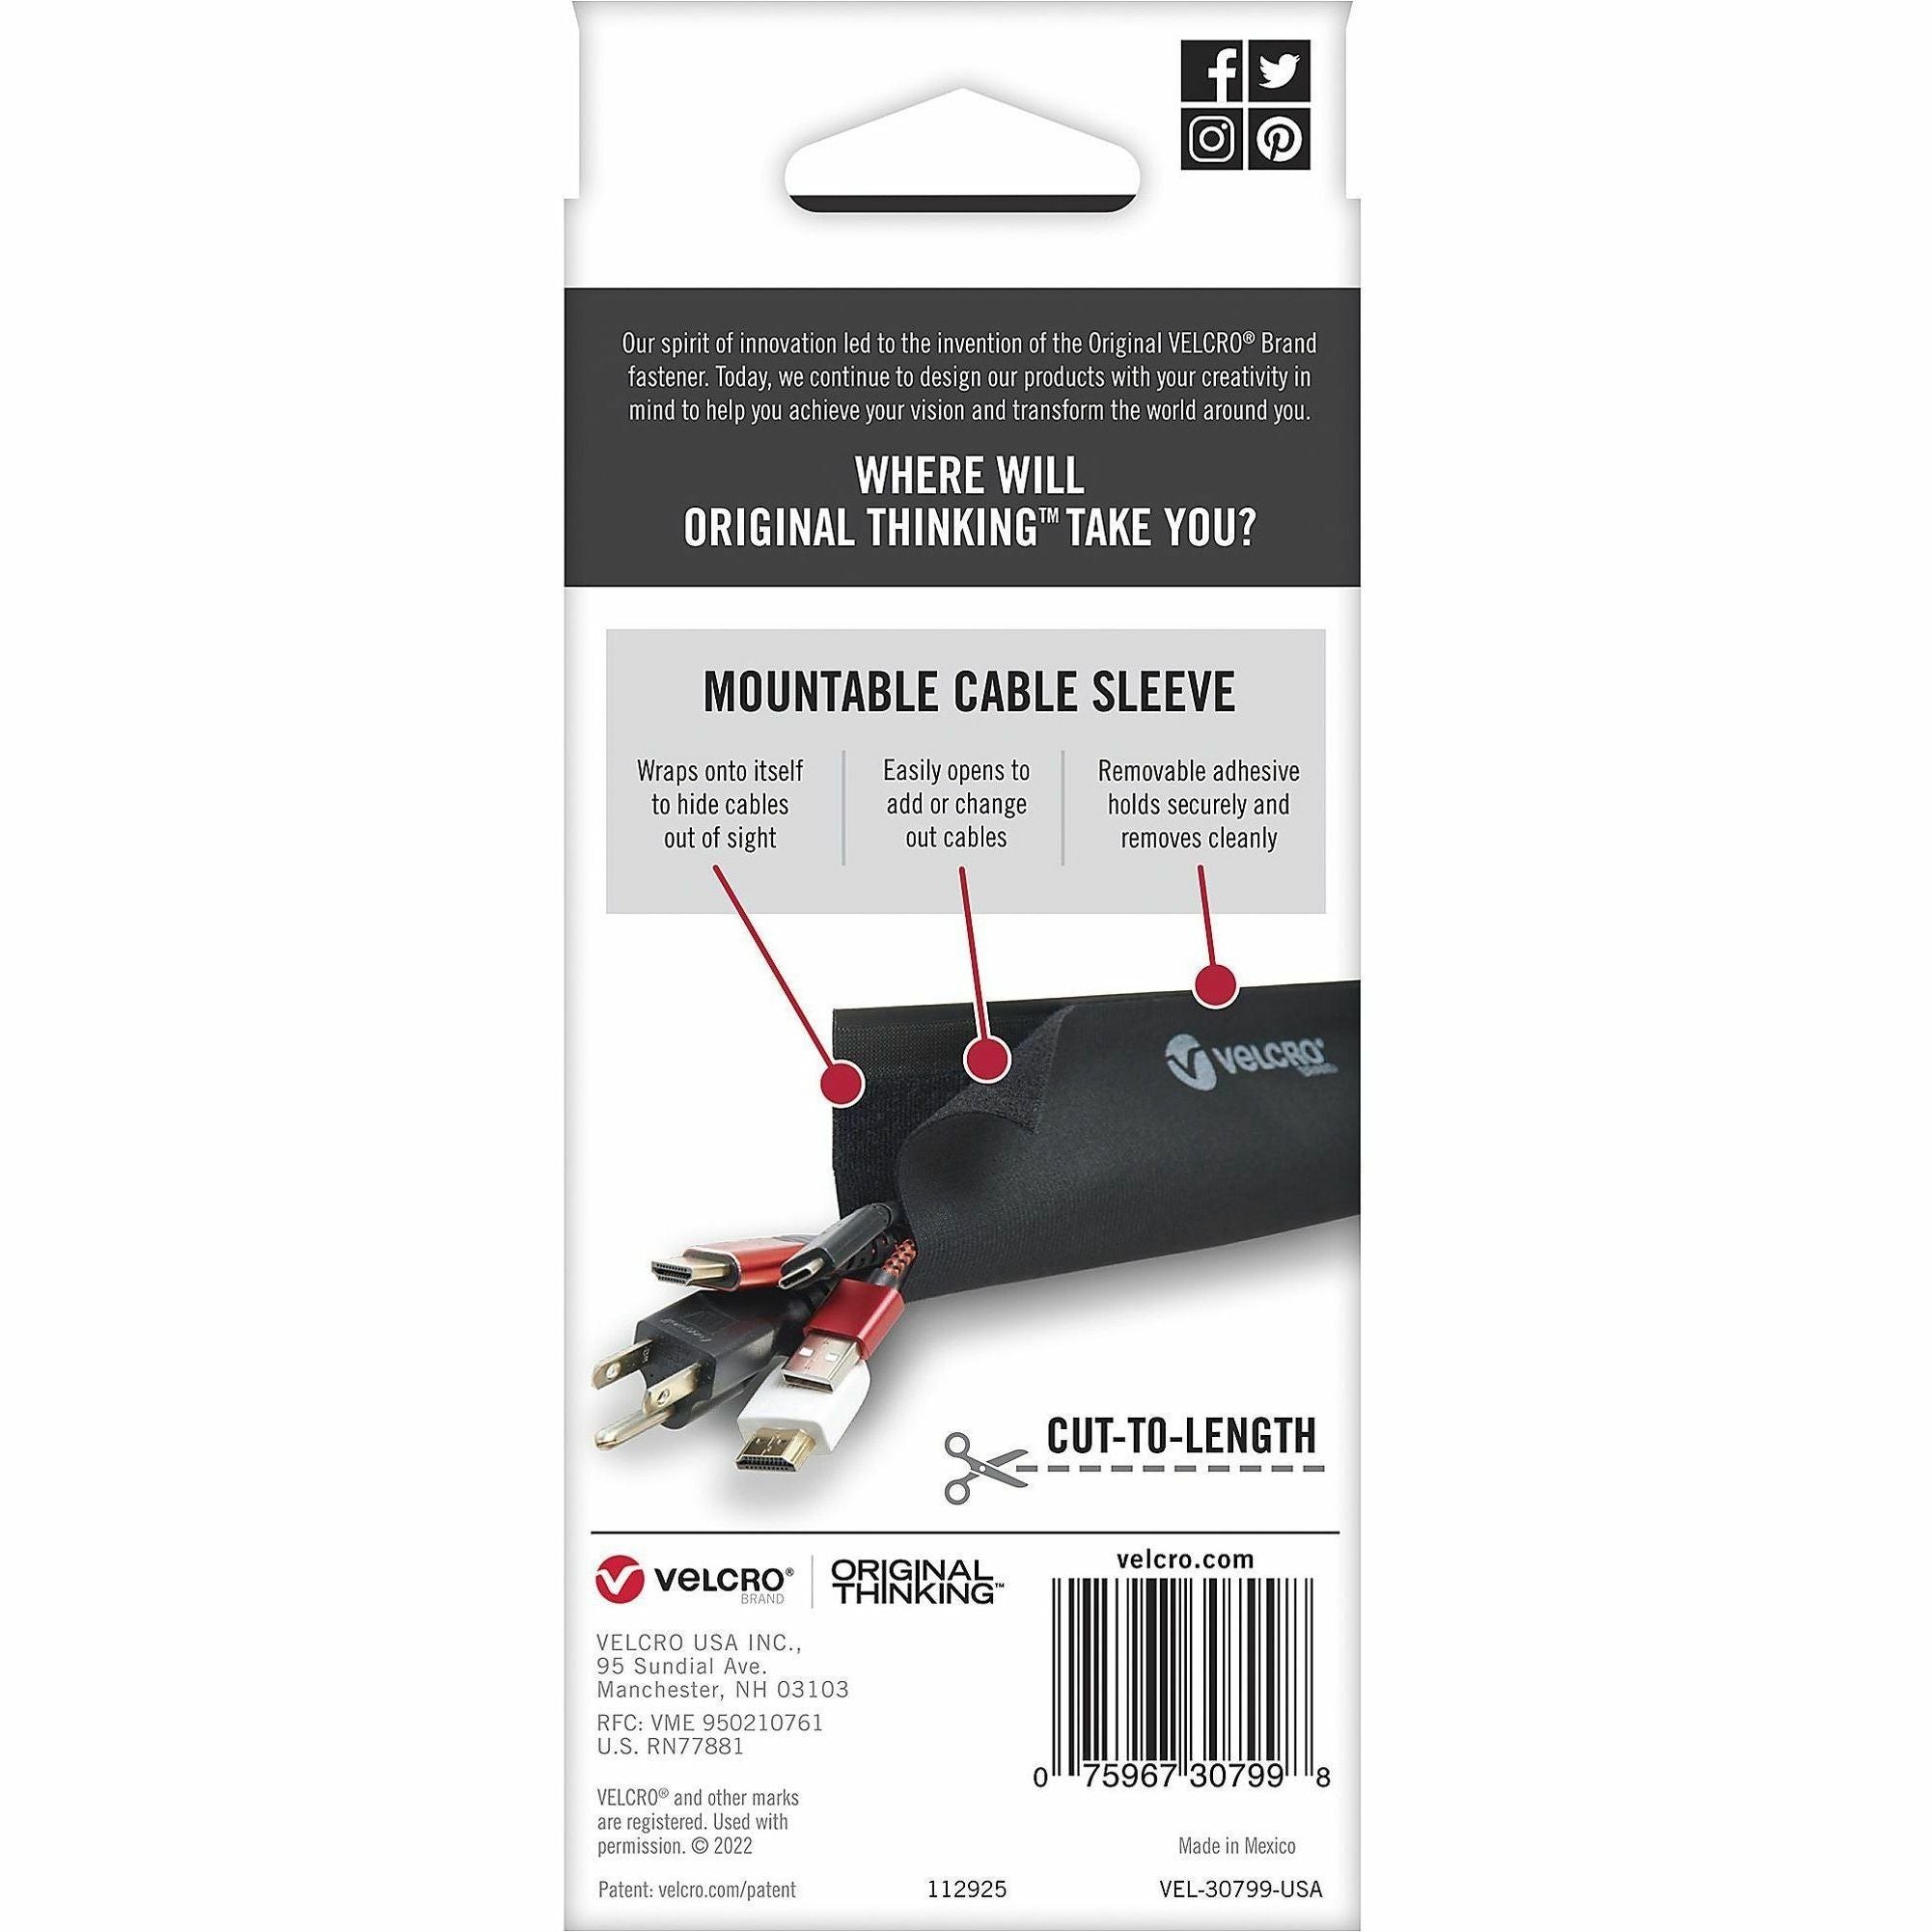 velcro-mountable-cut-to-length-cable-sleeves-cable-sleeve-black-2-36-length_vek30799 - 2